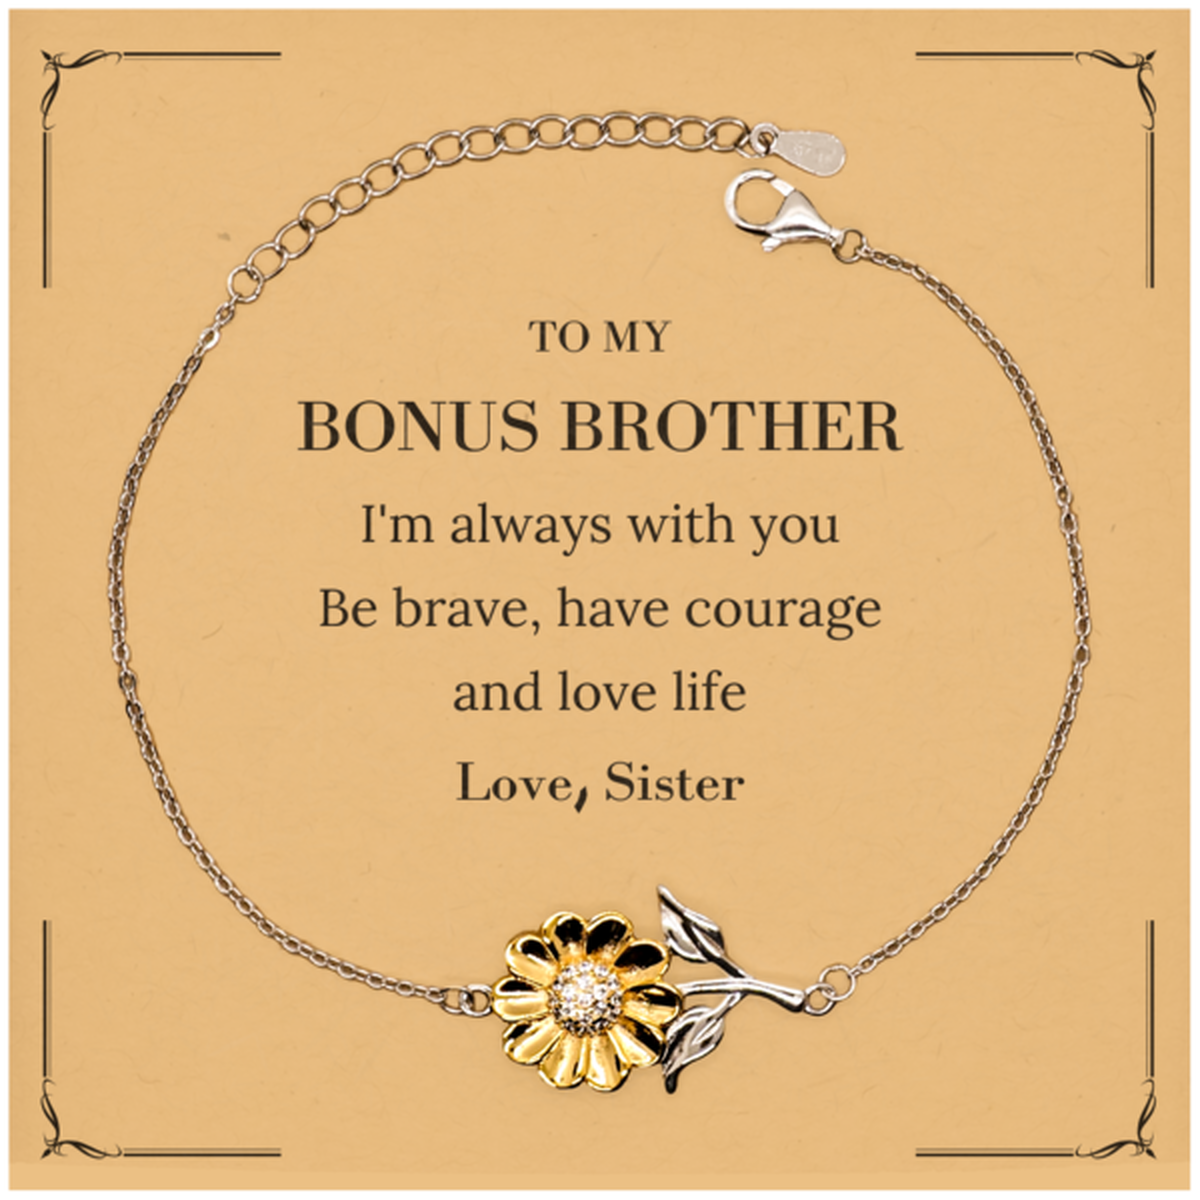 To My Bonus Brother Gifts from Sister, Unique Sunflower Bracelet Inspirational Christmas Birthday Graduation Gifts for Bonus Brother I'm always with you. Be brave, have courage and love life. Love, Sister